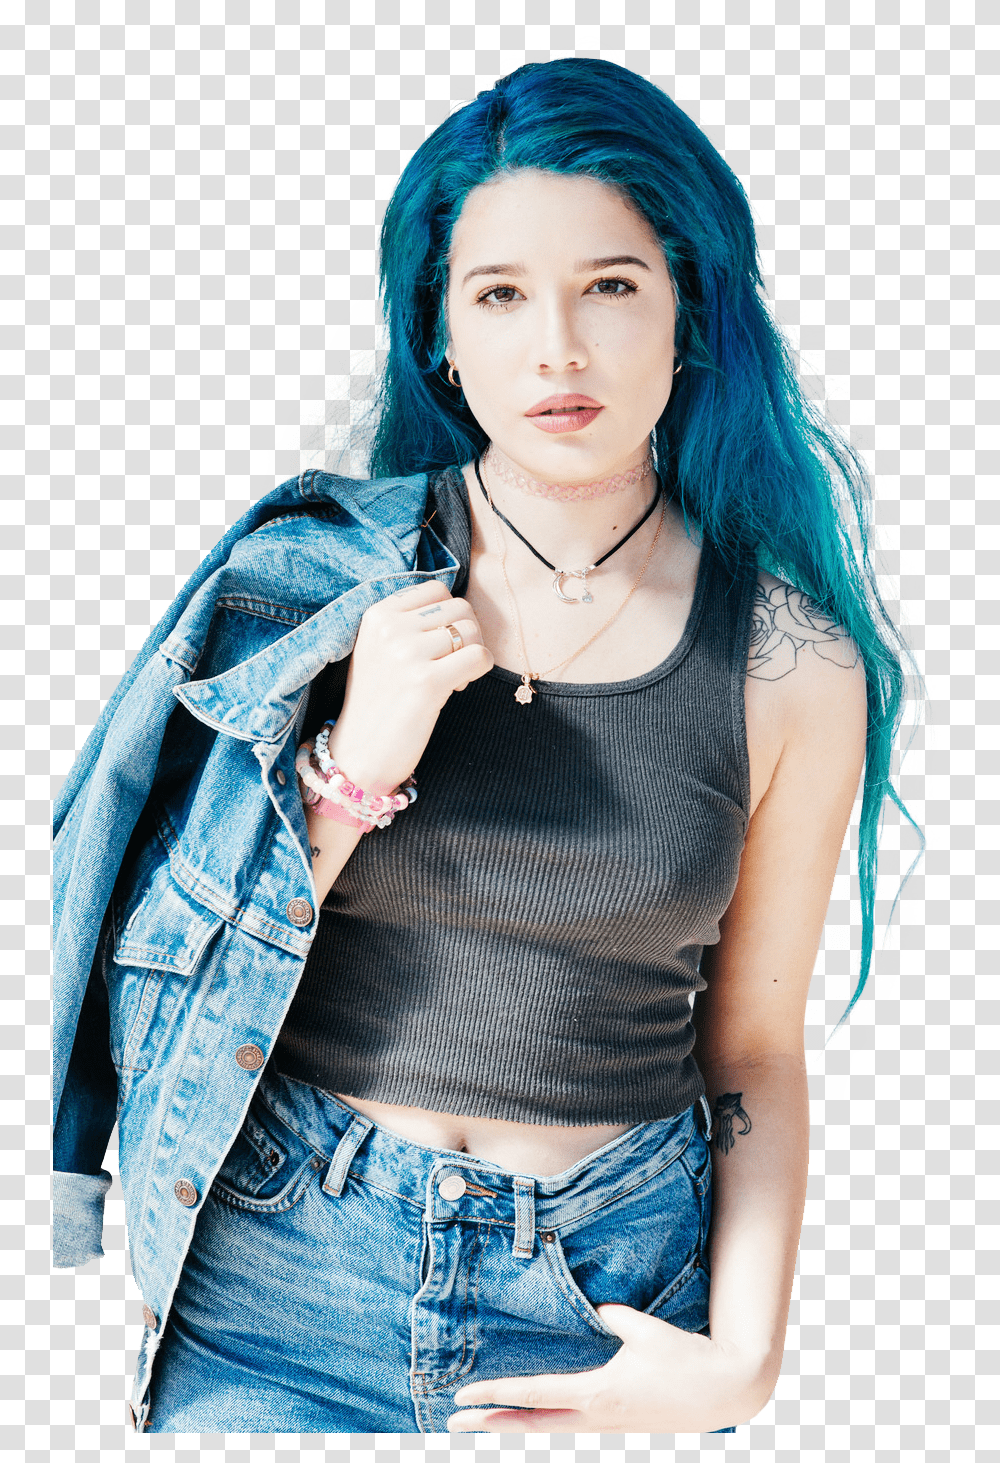 Clip Art Halsey With Long Hair Halsey, Necklace, Jewelry, Accessories Transparent Png